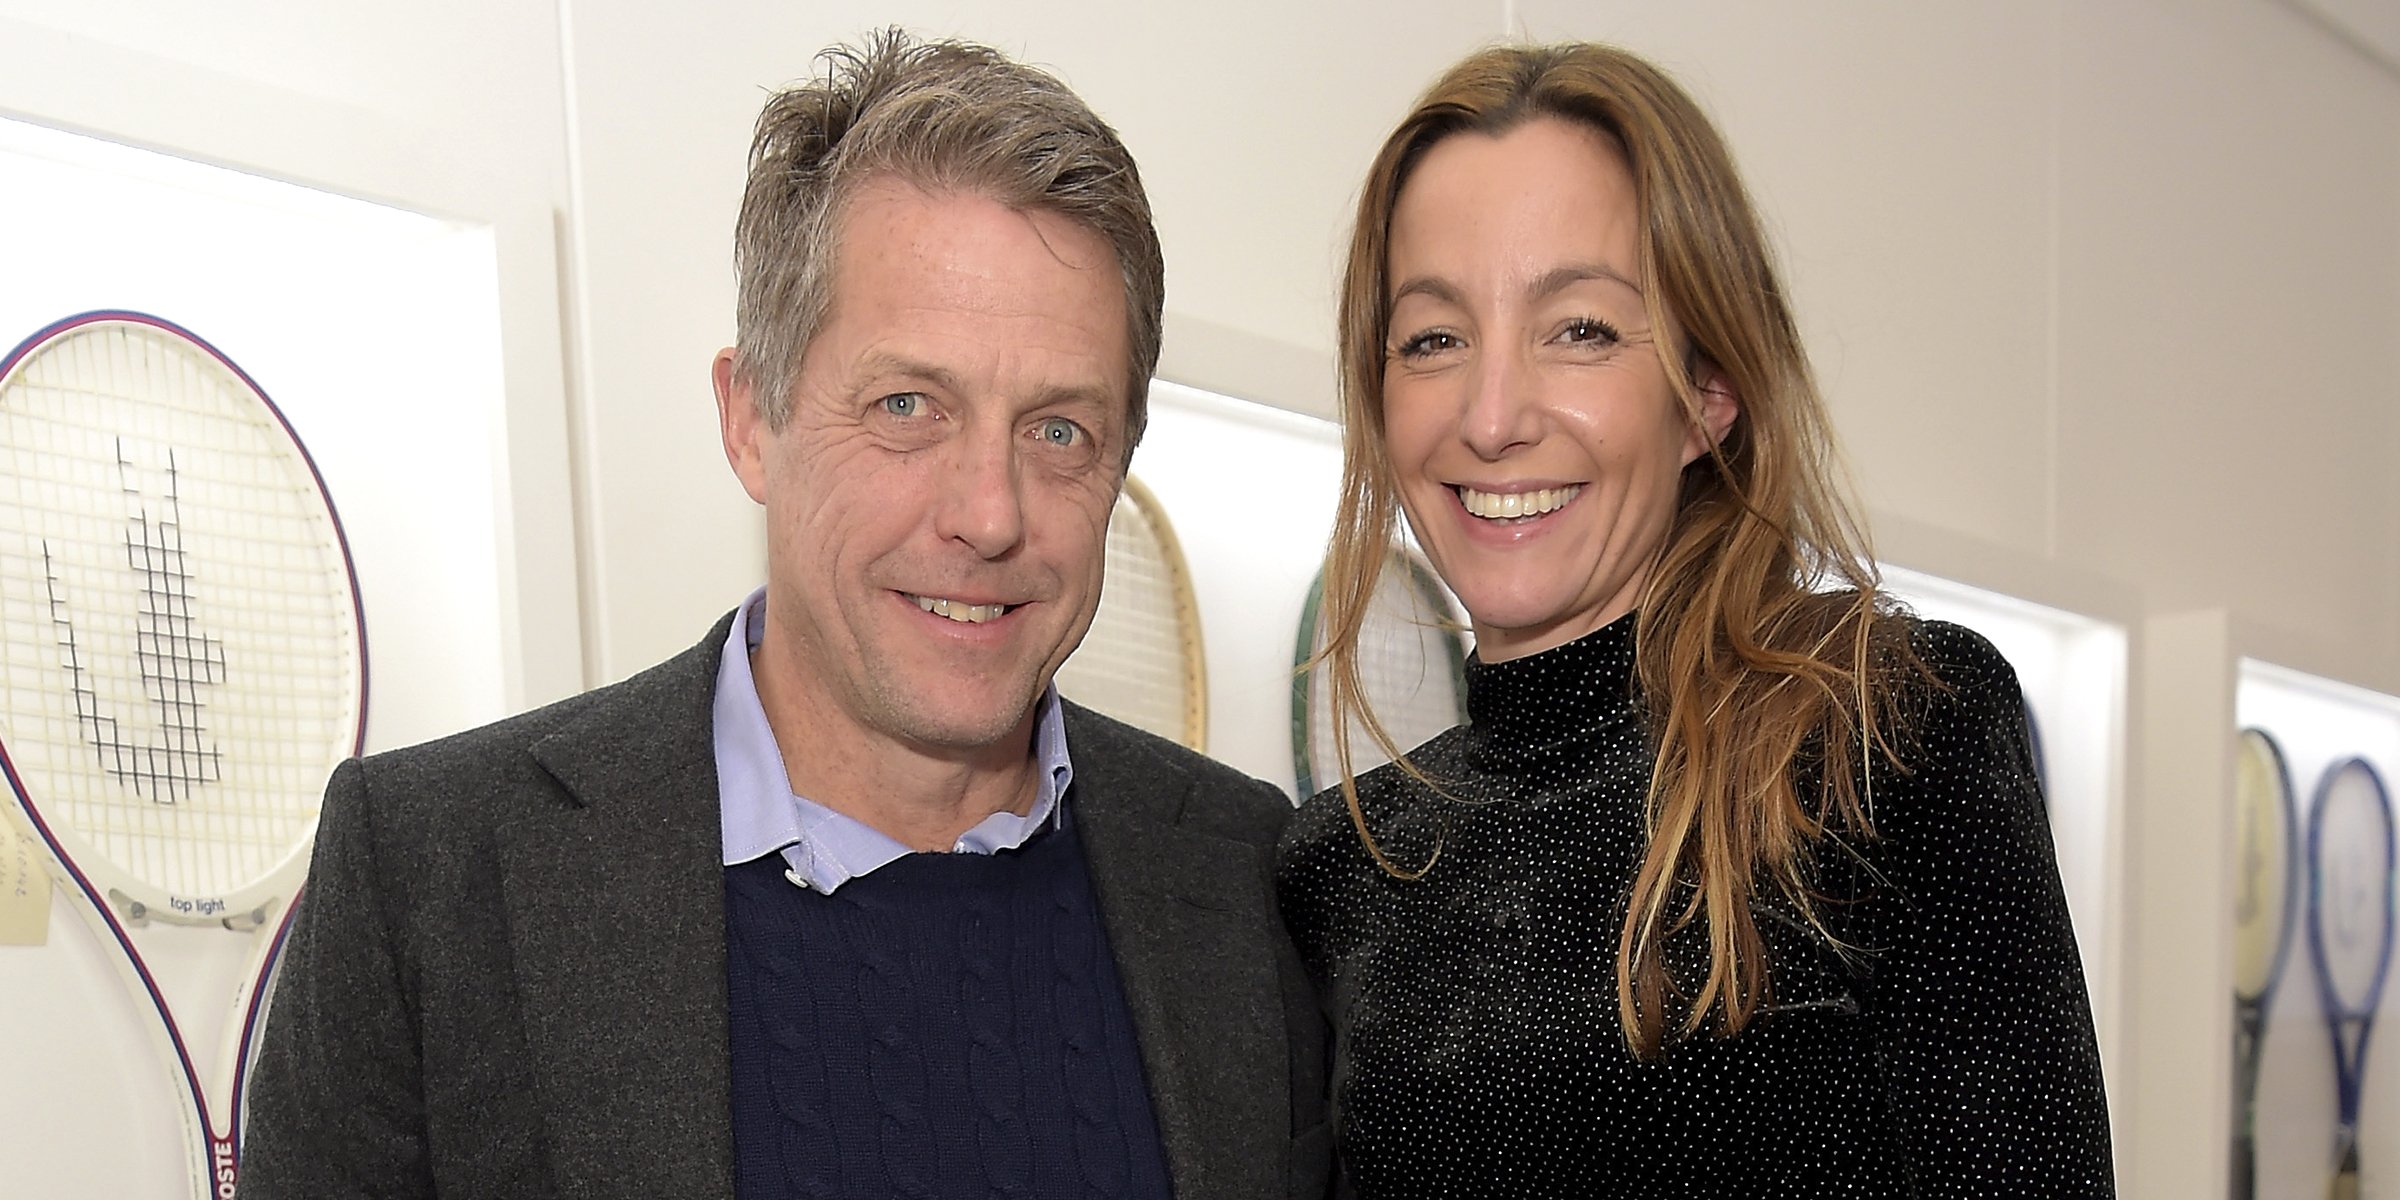 Hugh Grant and his wife Anna Eberstein. | Source: Getty Images